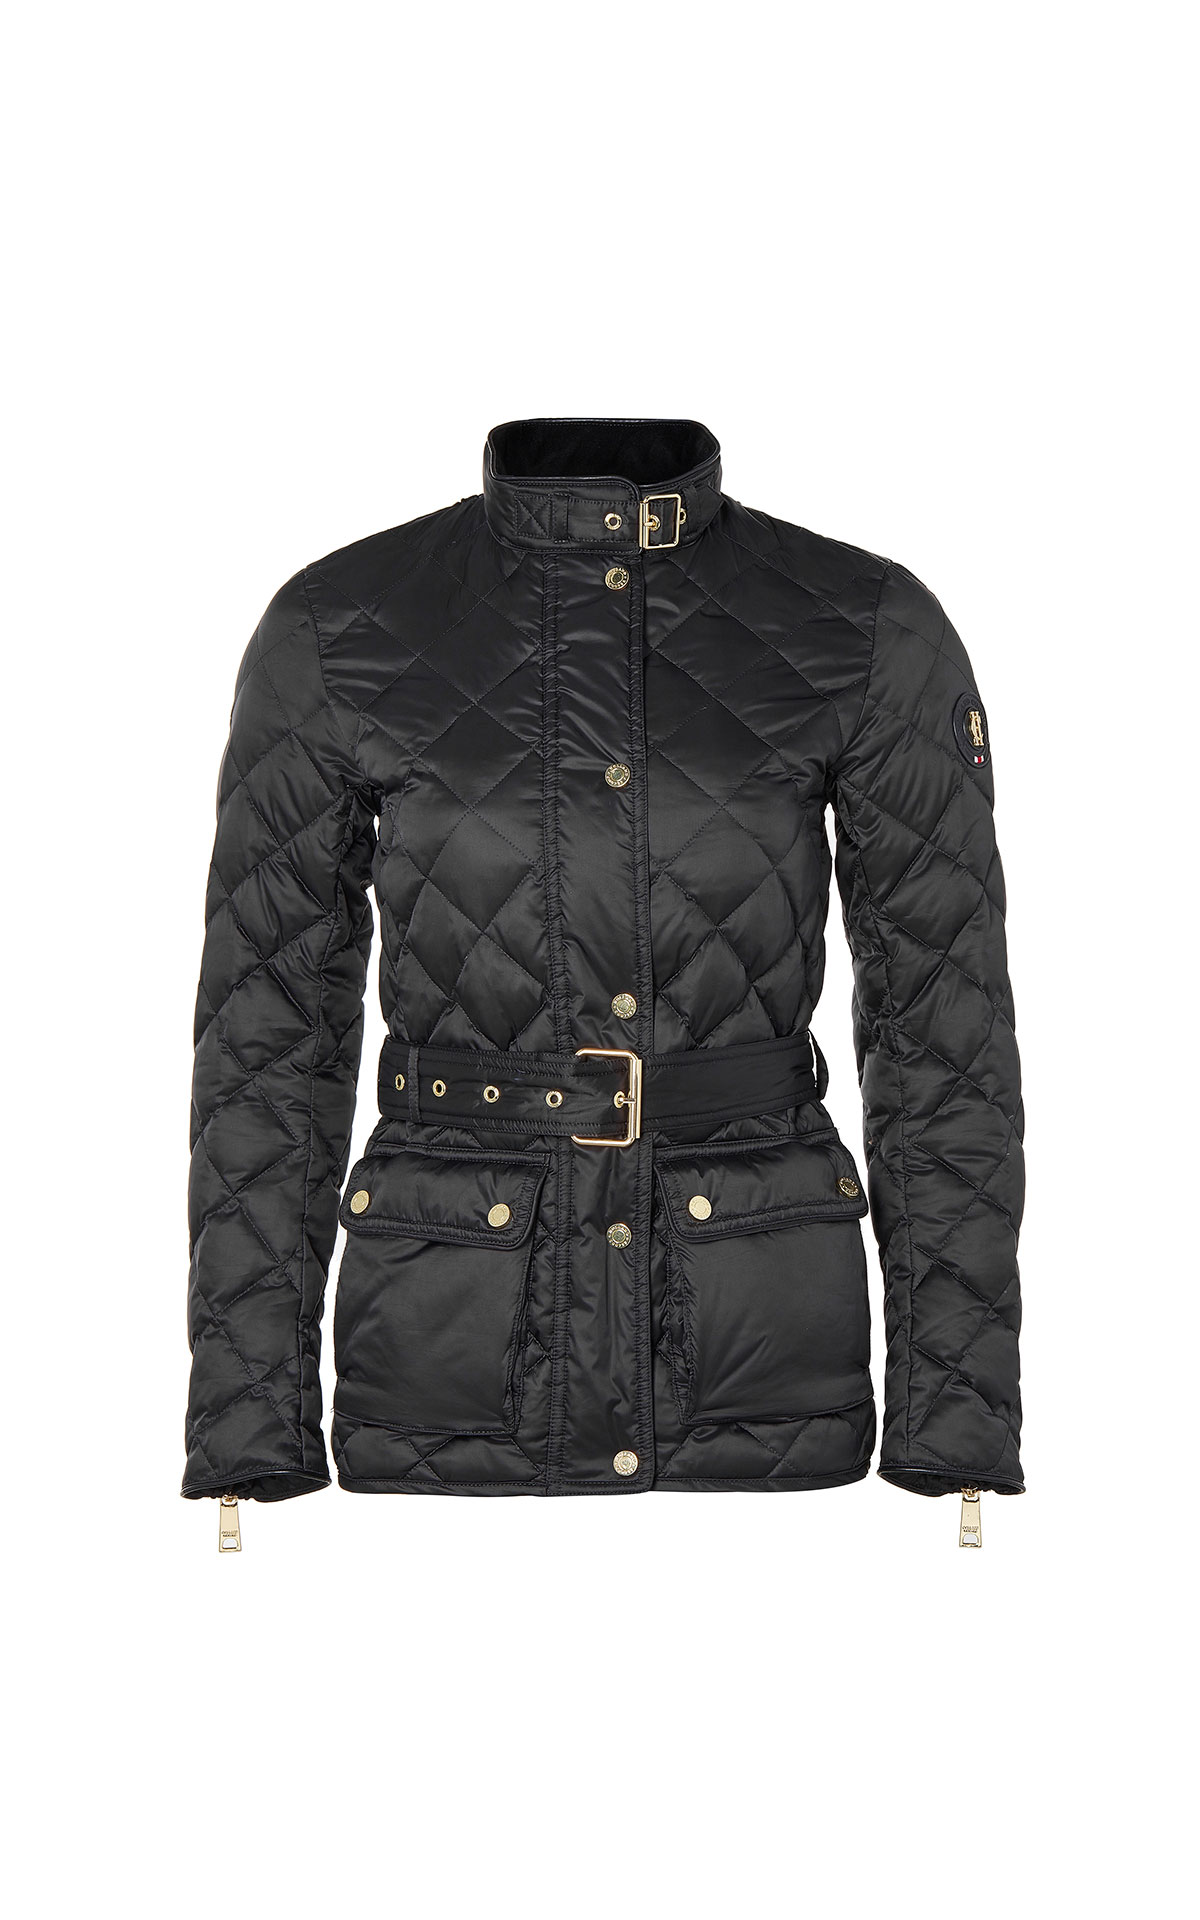 Holland Cooper Diamond quilt heritage jacket in black from Bicester Village